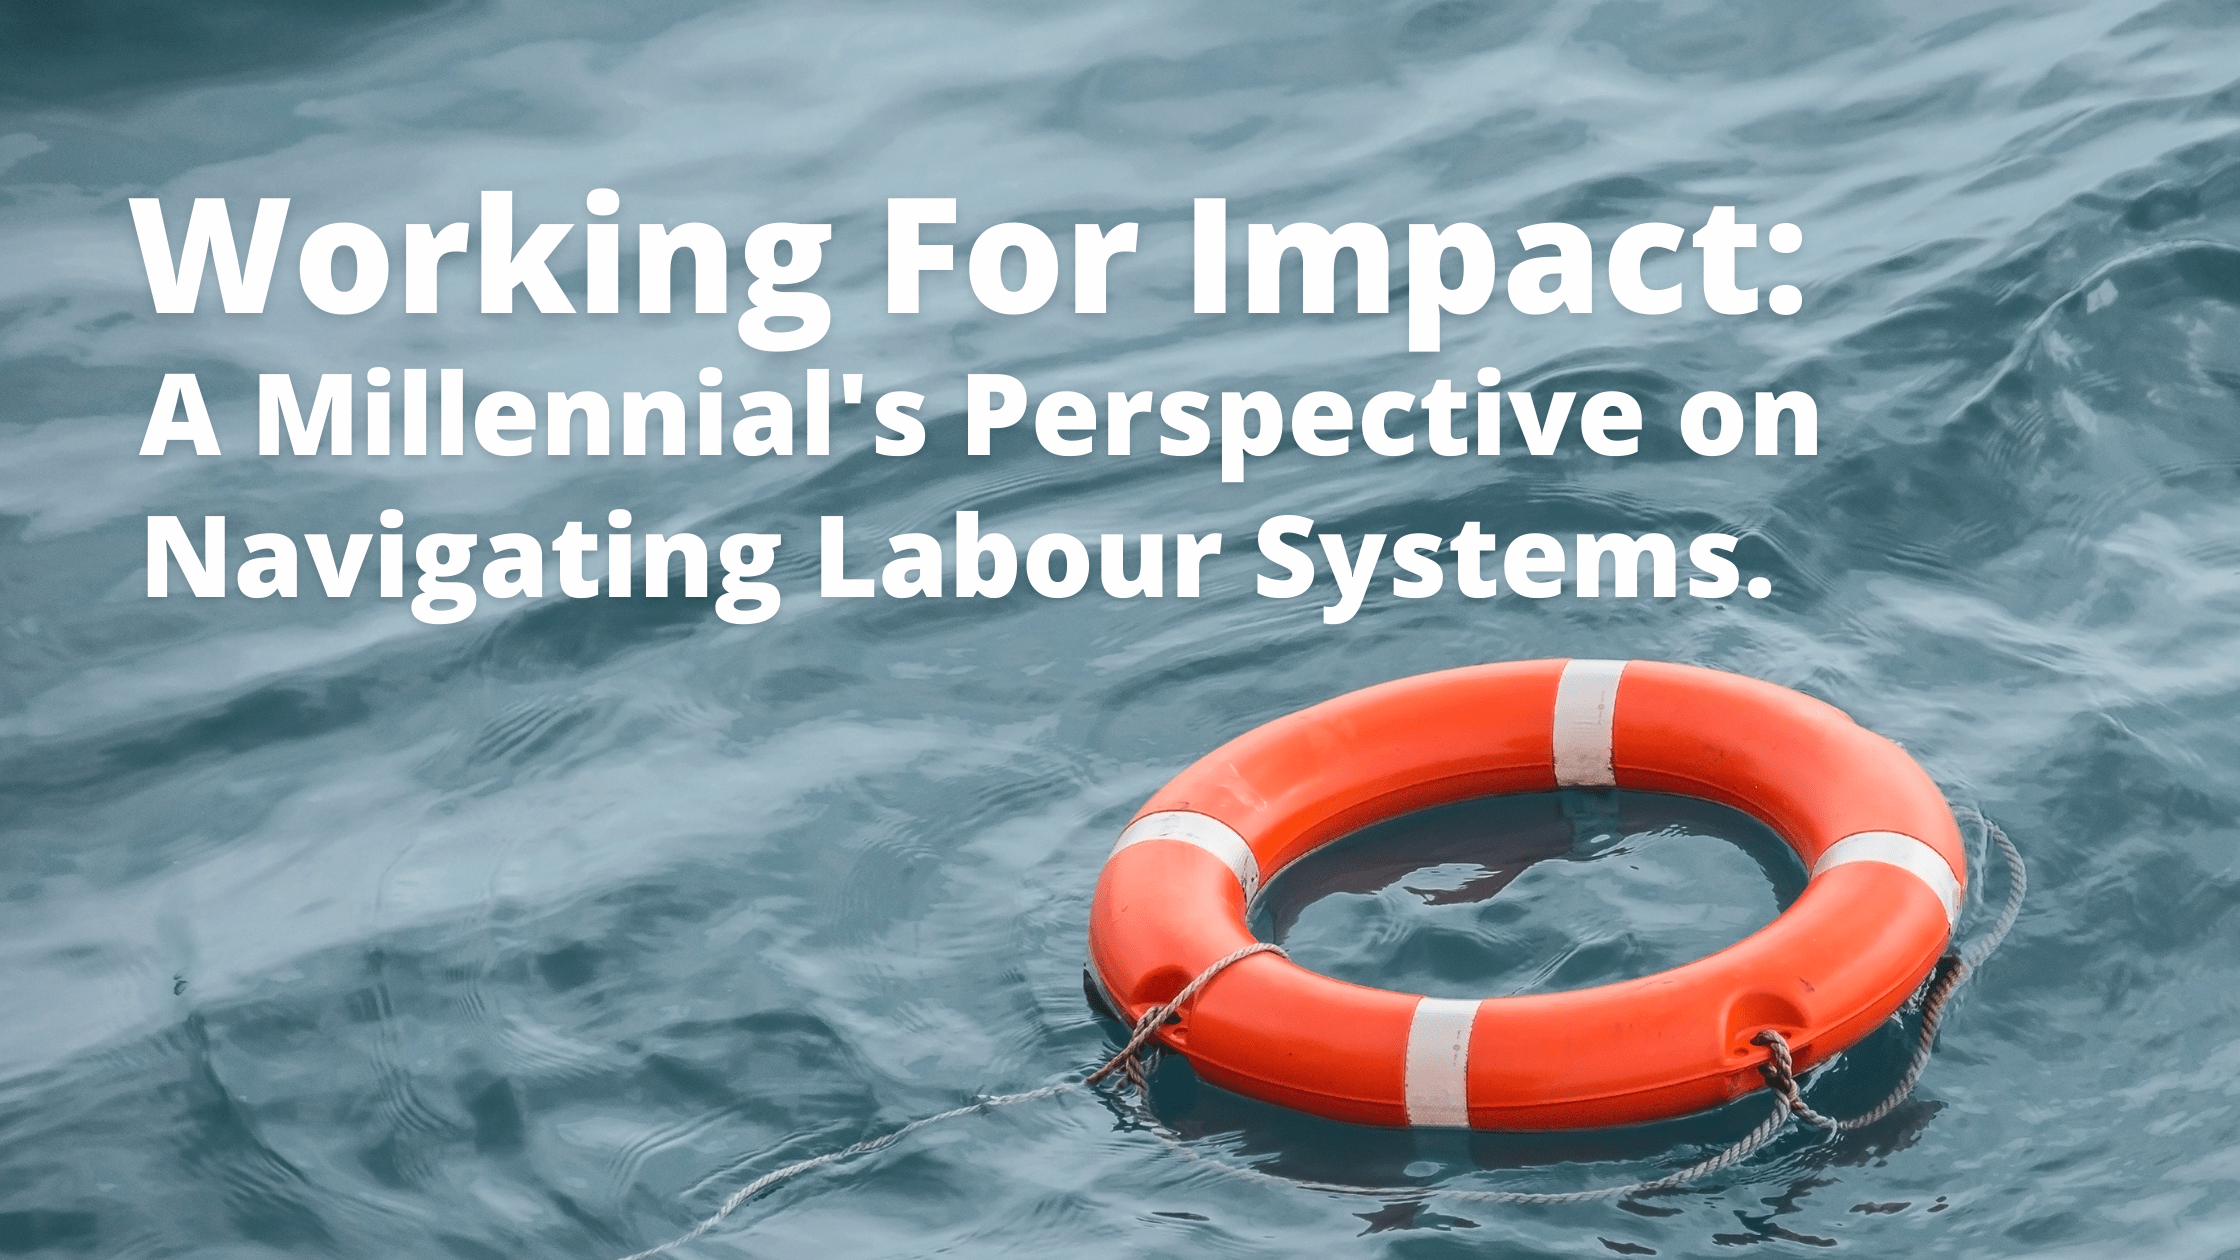 A life saver floating on water with the text working for impact: A millennial's perspective on navigating labour systems.